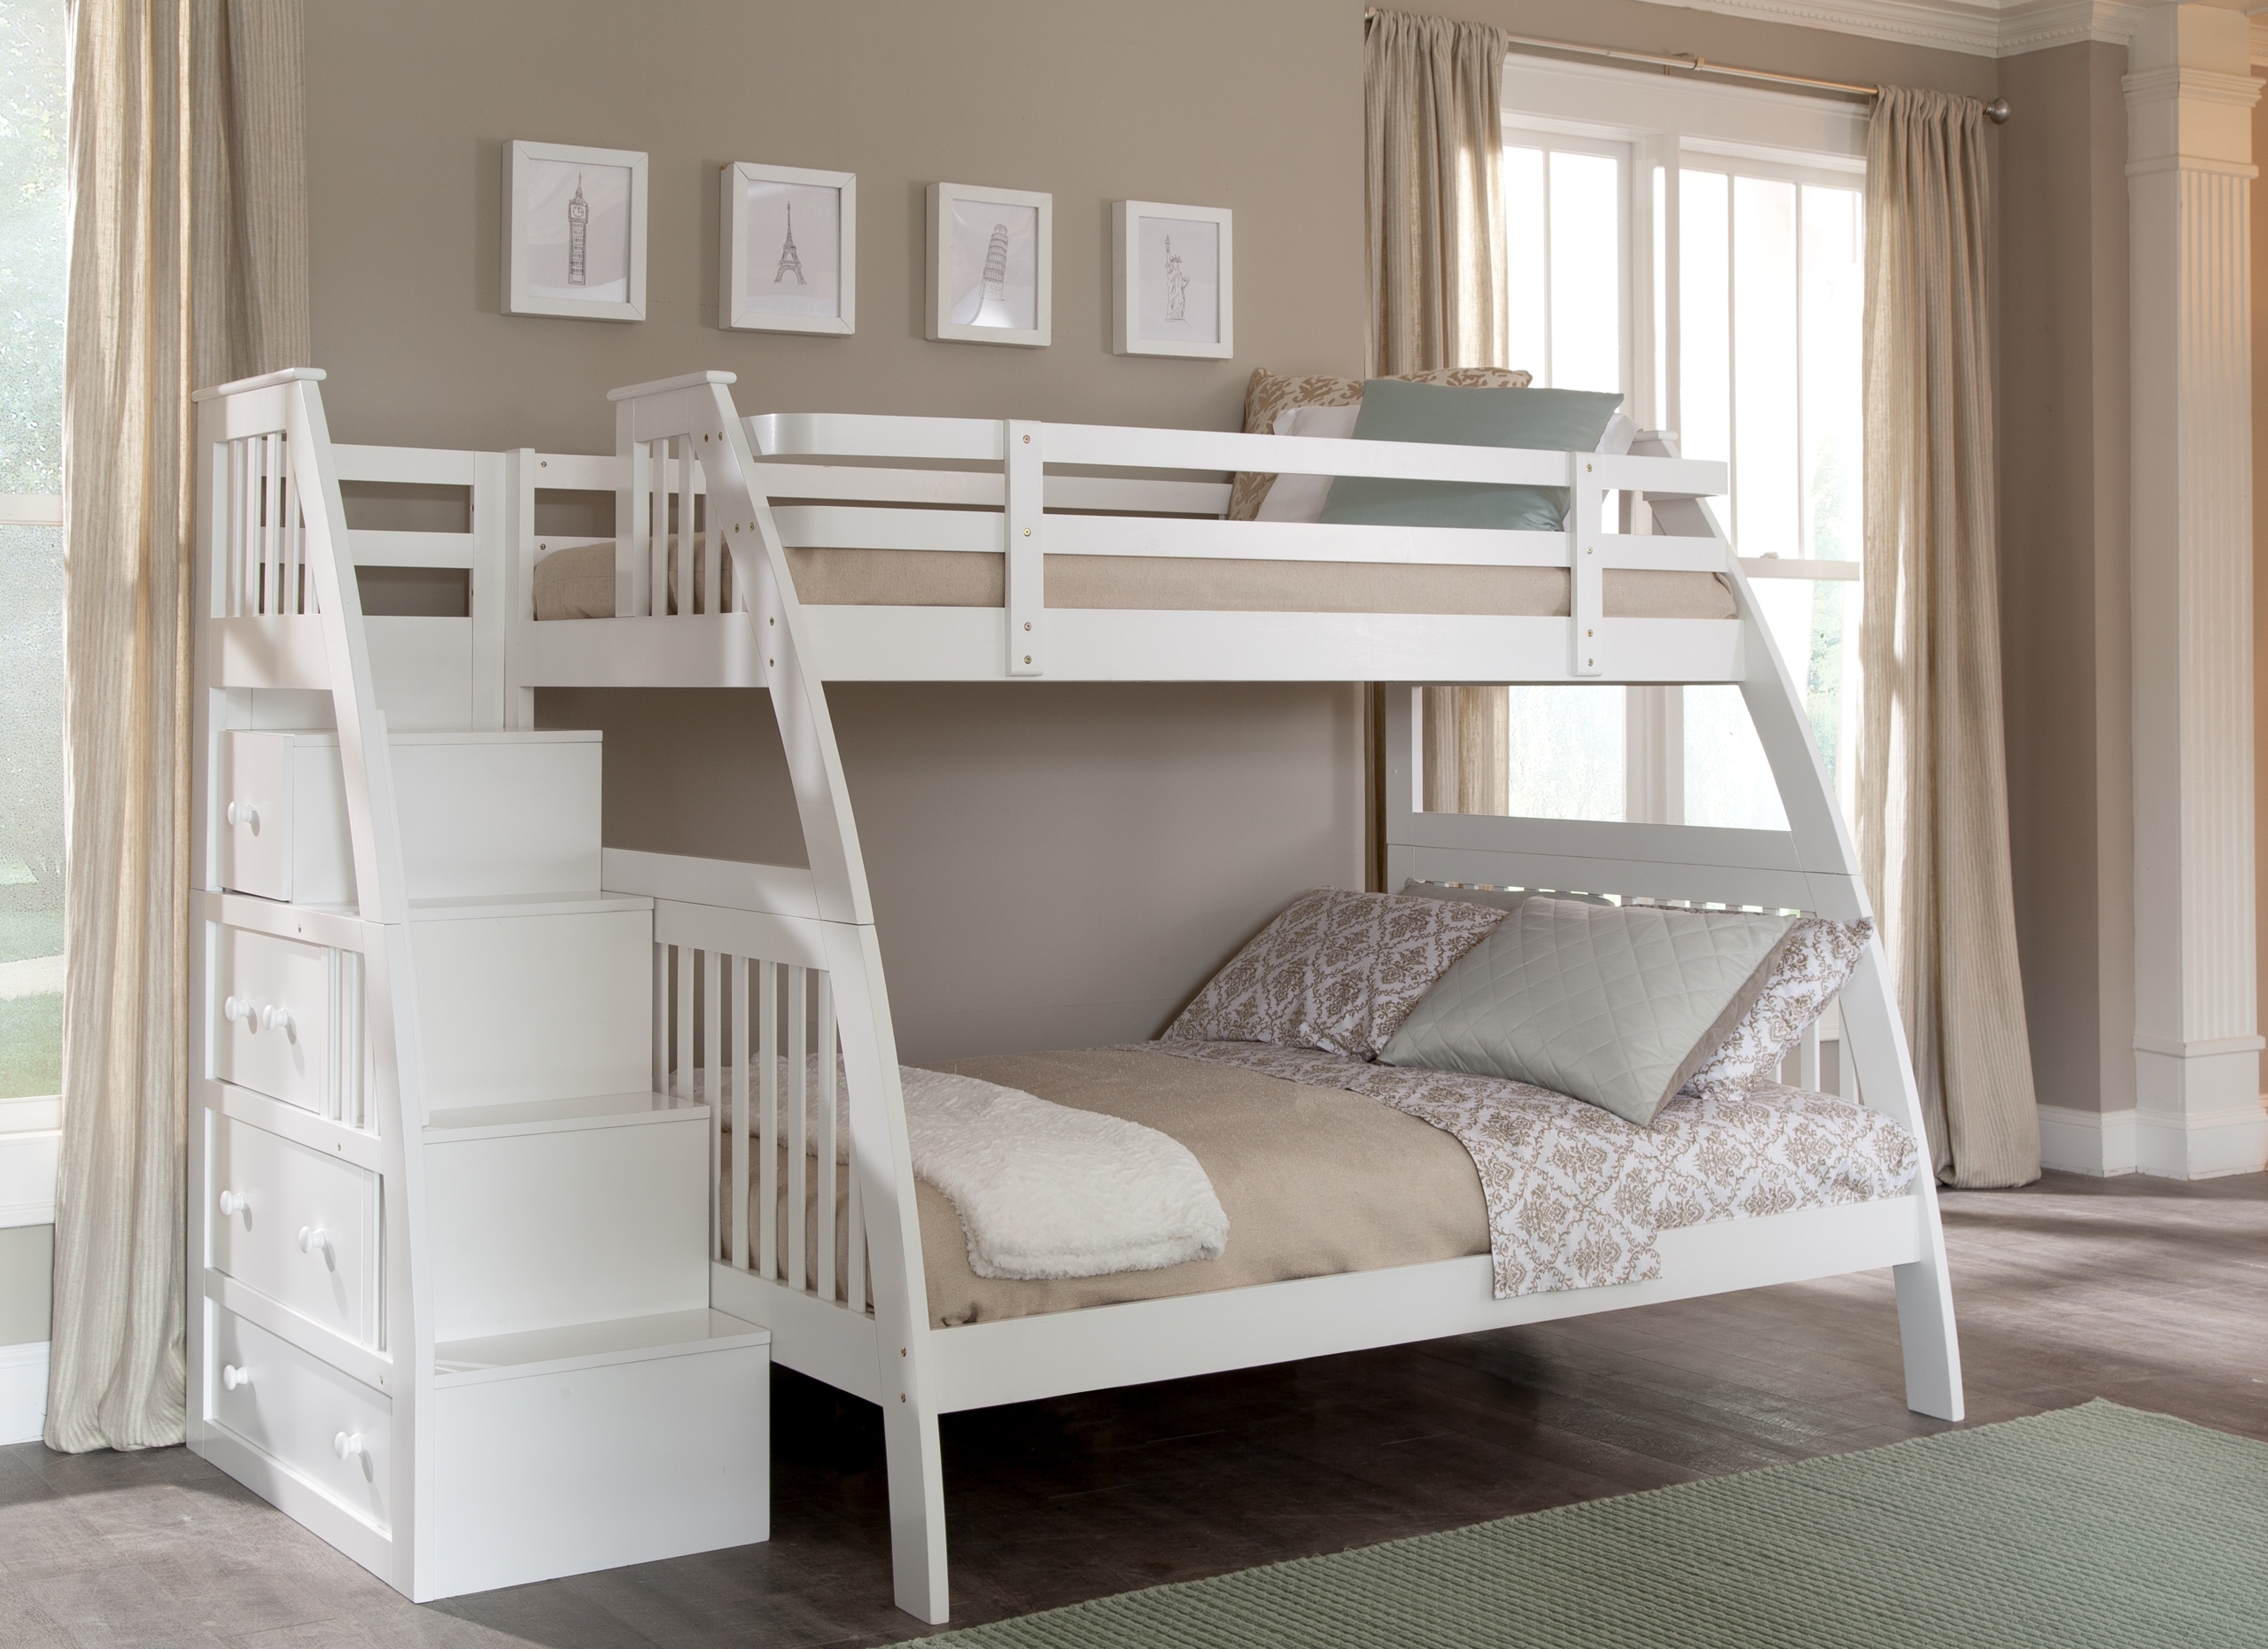 Canwood Ridgeline Bunk Bed with Built-In Stairs Drawers, Twin Over Full, White